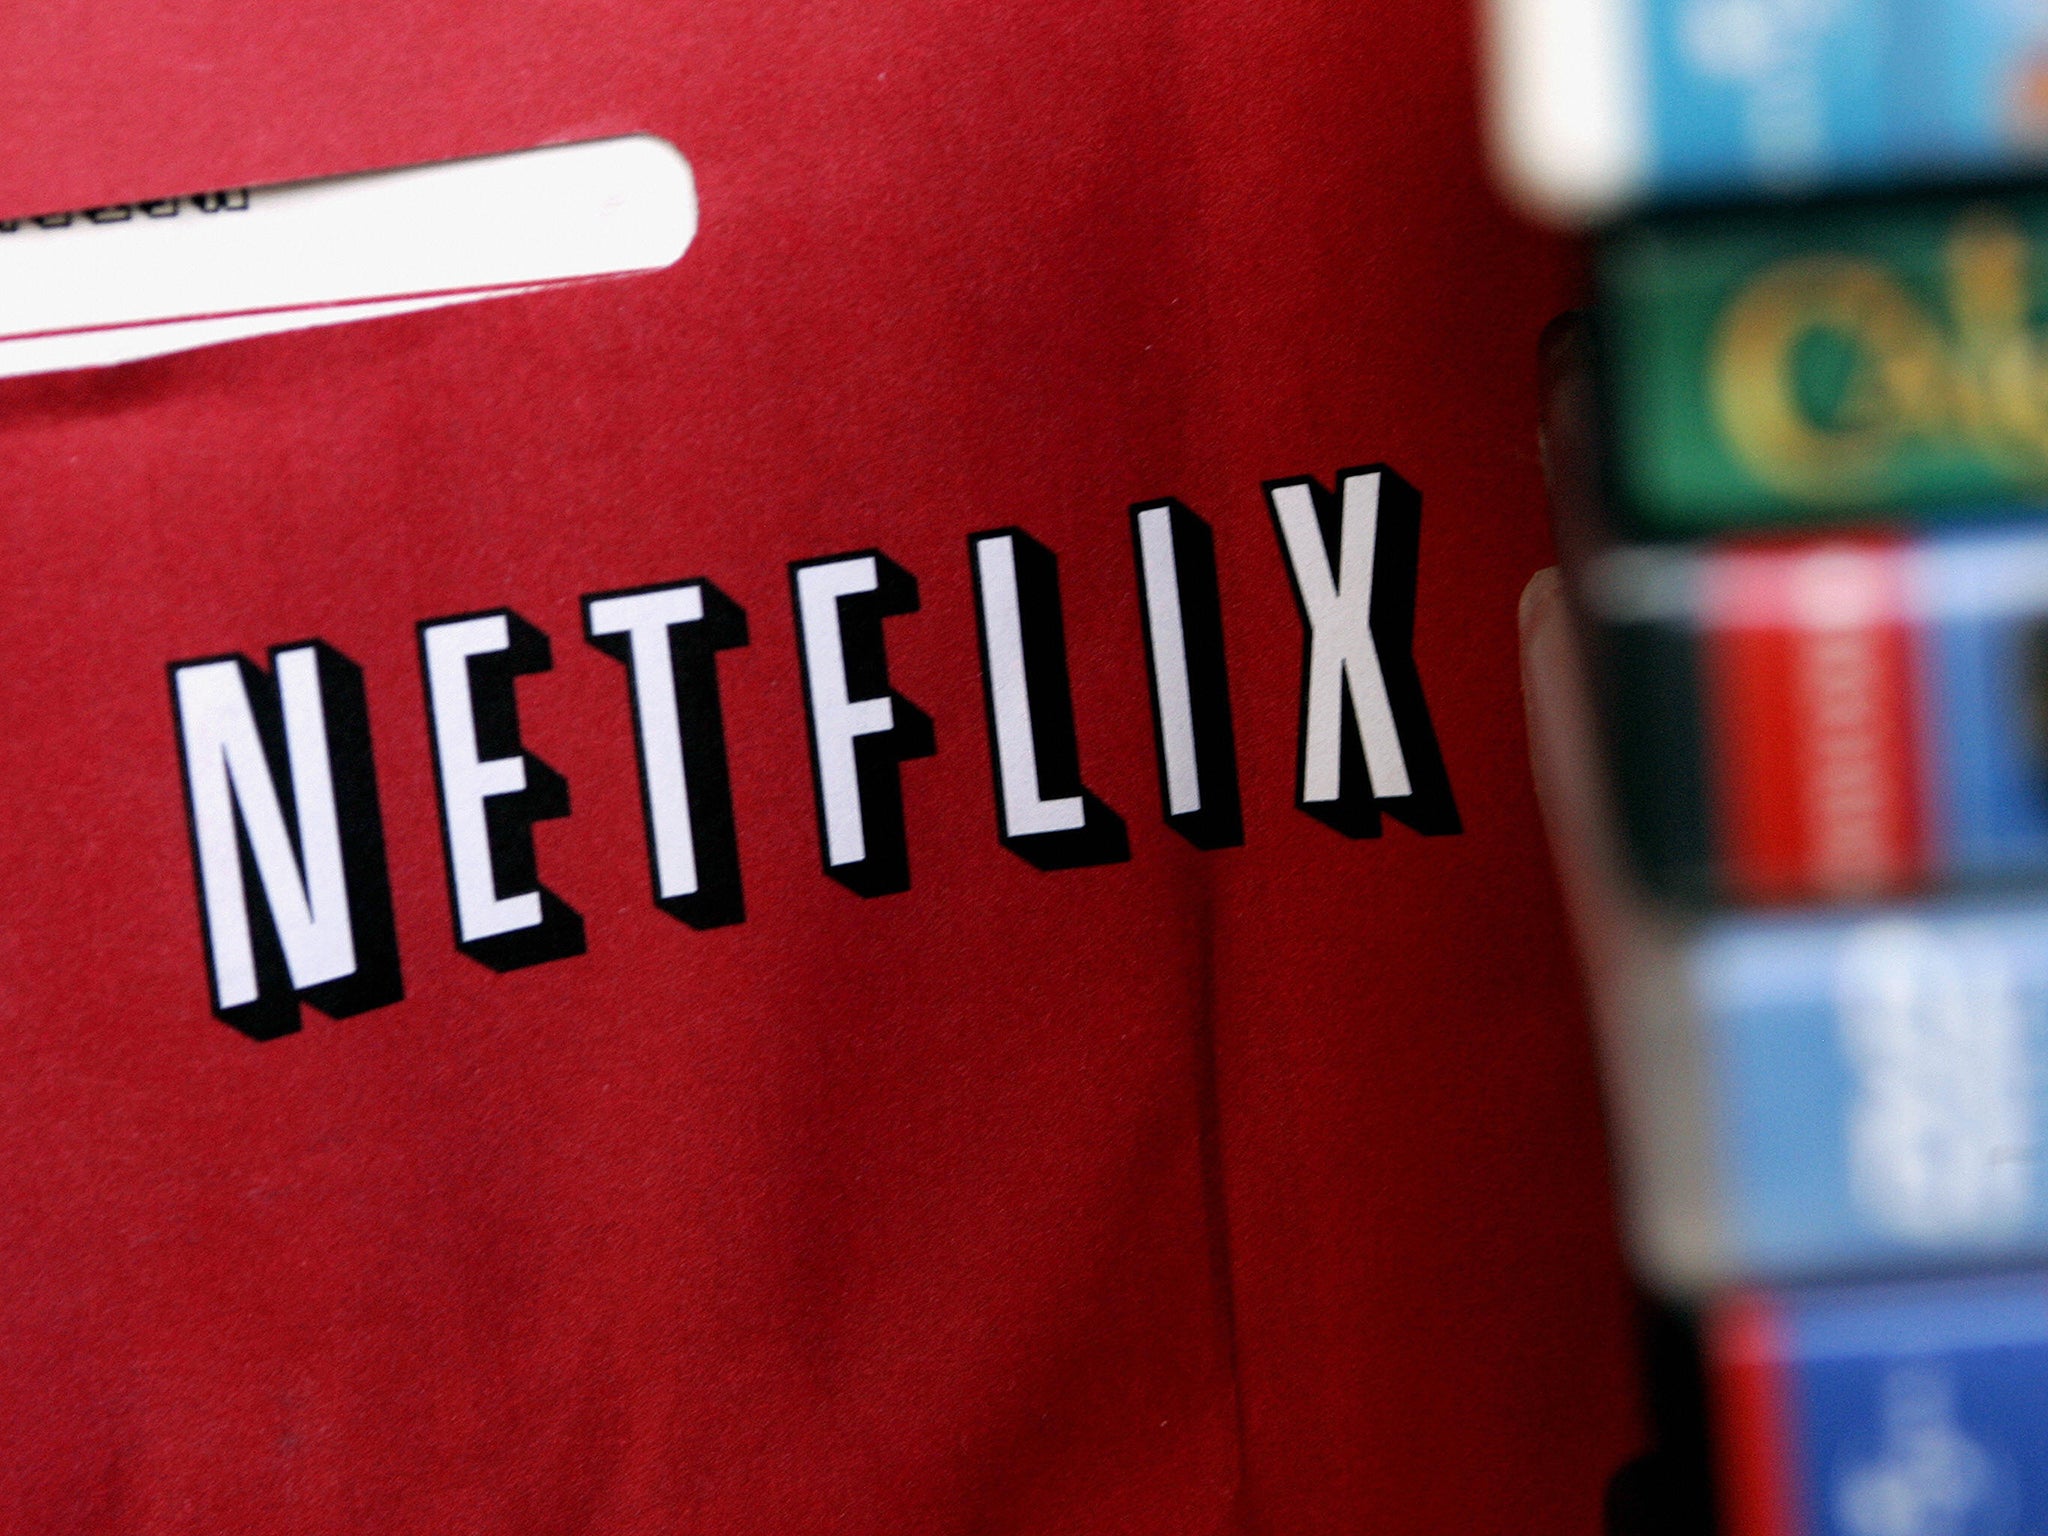 Netflix has long presented itself as a champion of unfettered access to Internet content